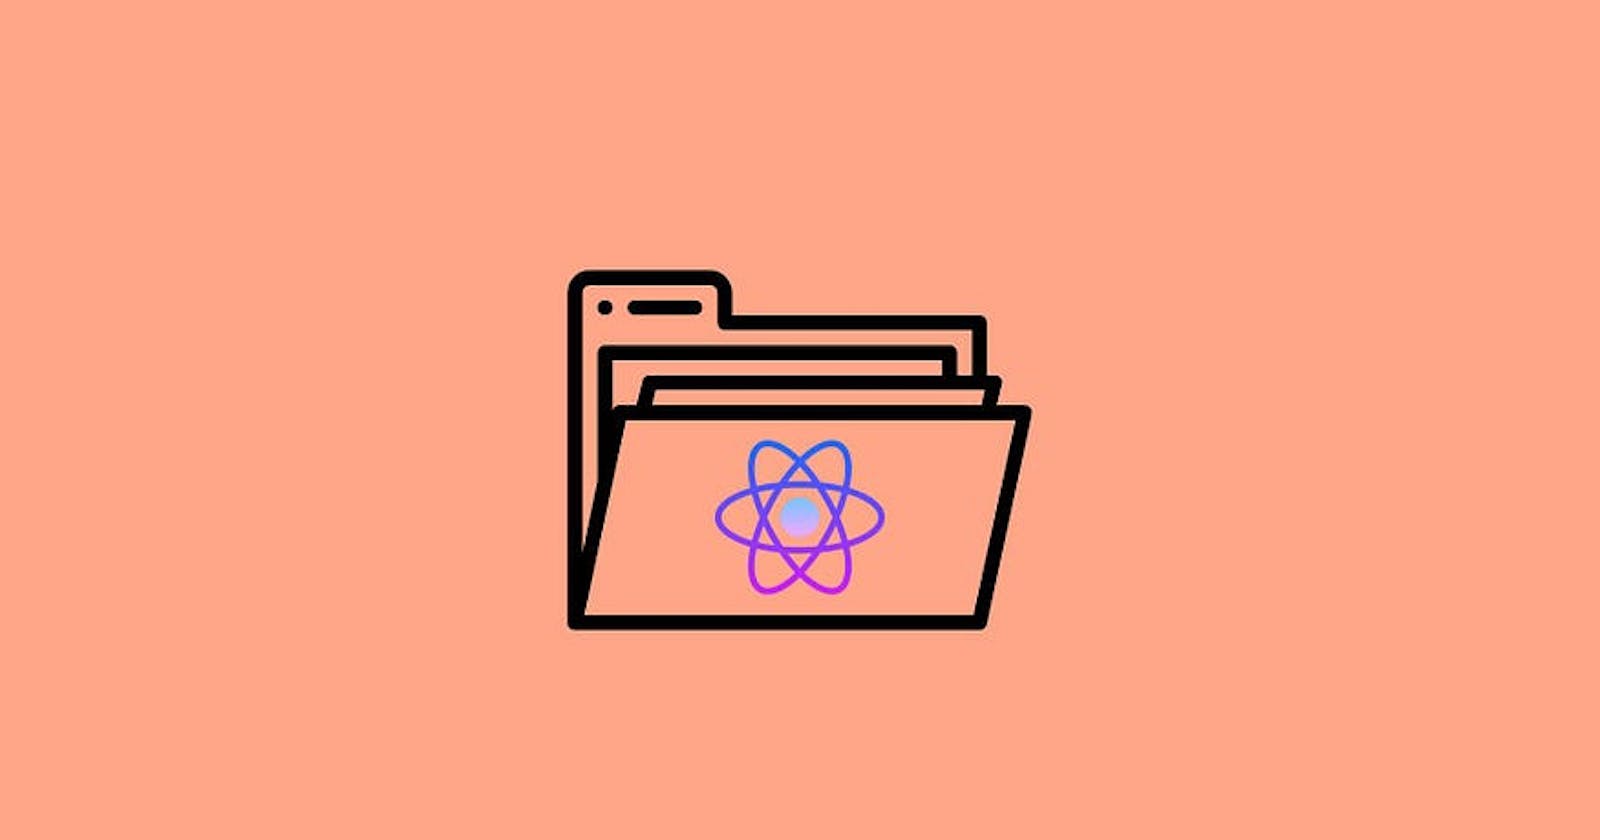 How I Structure my React Projects